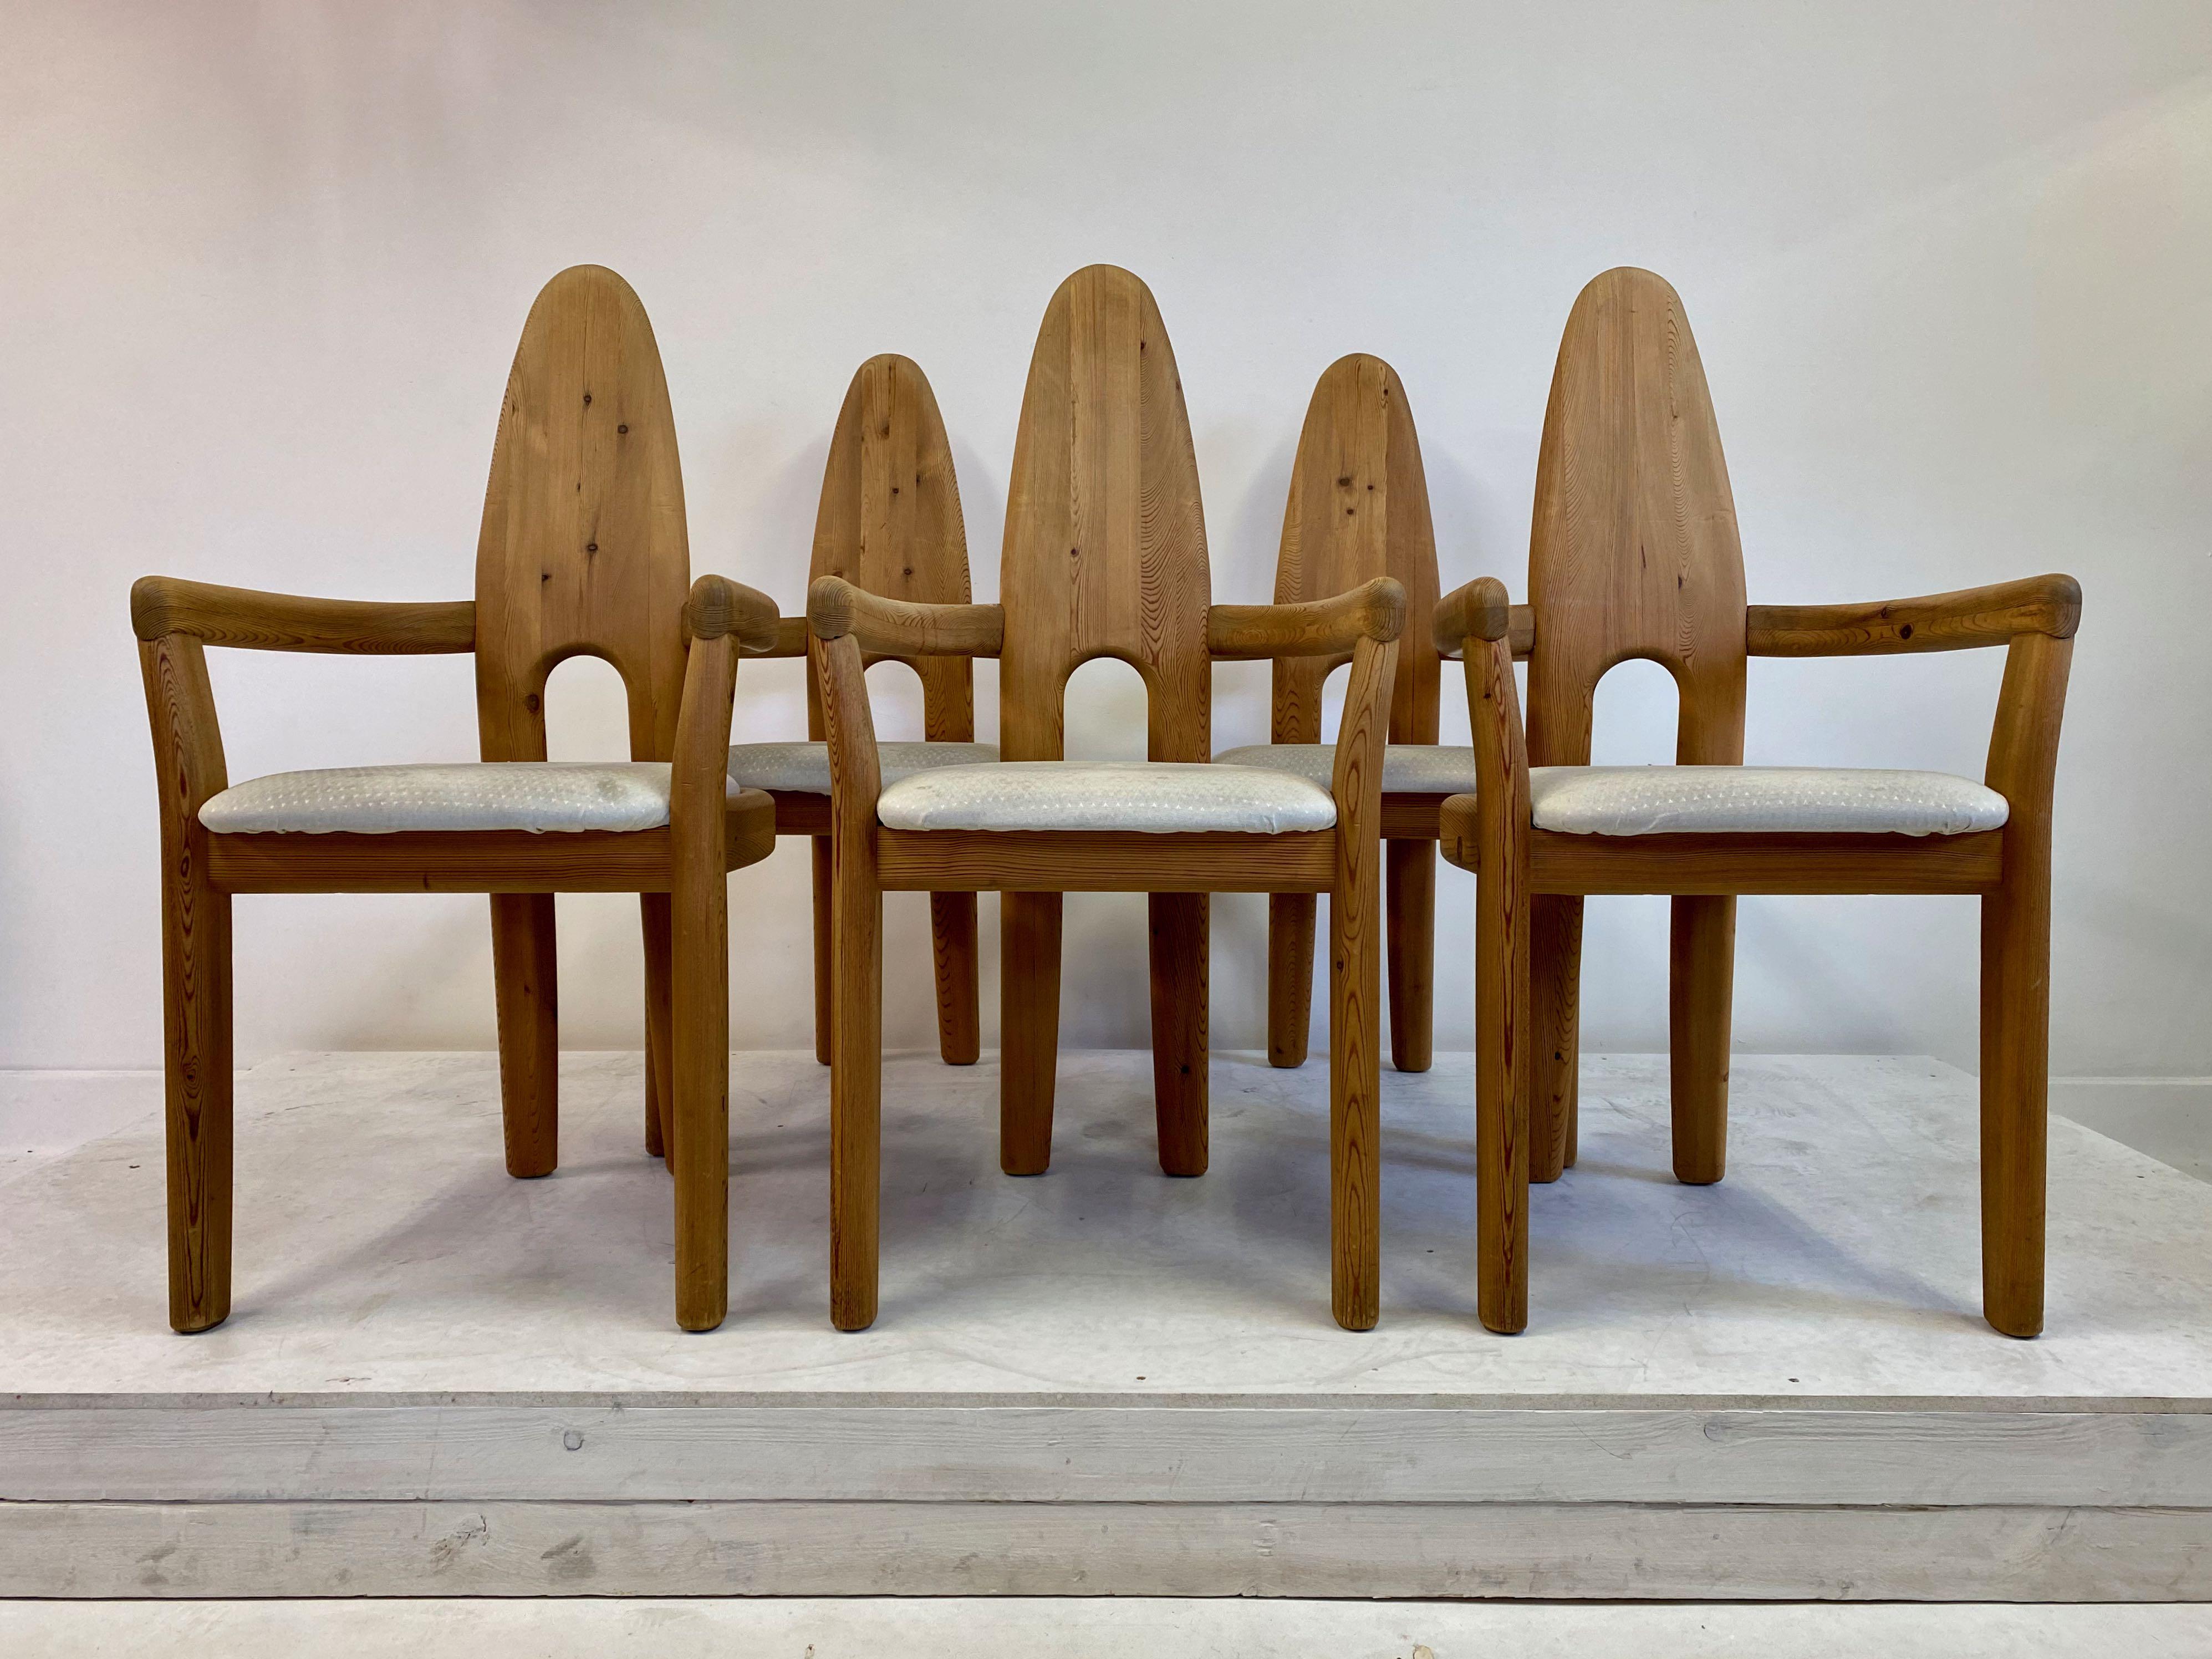 Set of five dining chairs

Solid pine

Danish or Swedish,

1970s-1980s

Measure: Seat height 47cm.
 